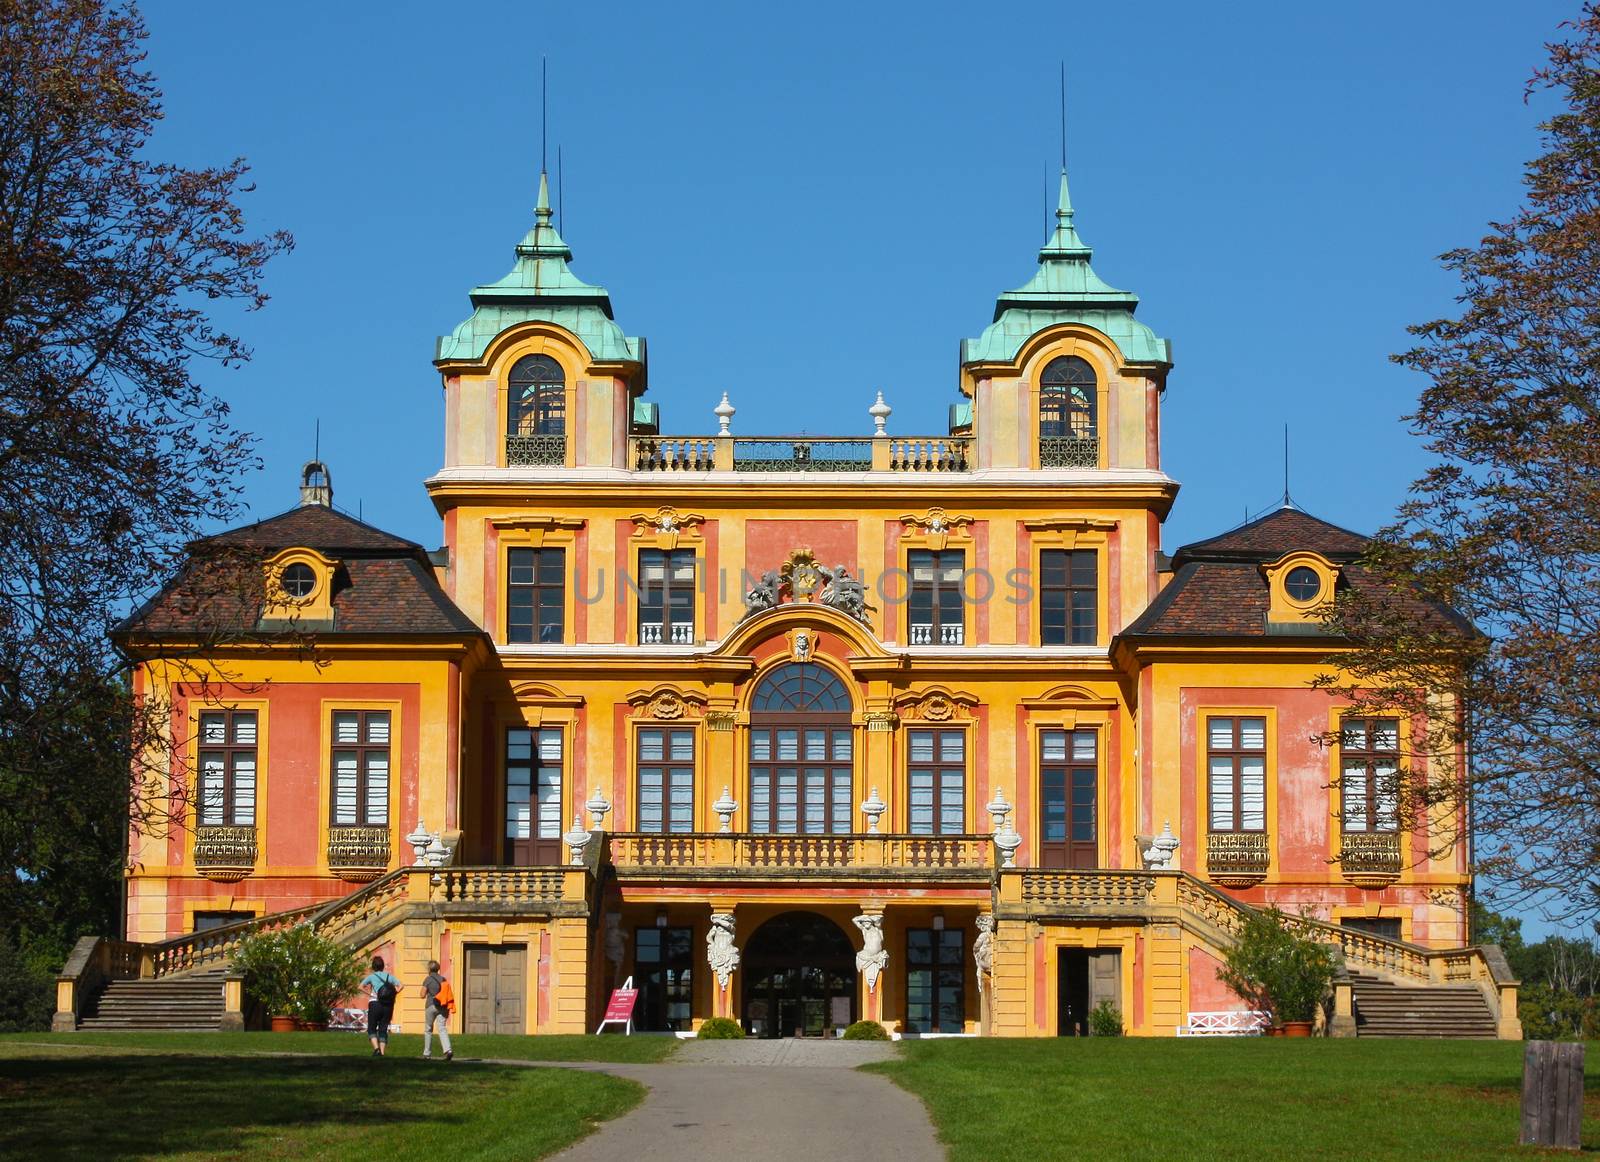 Situated near Stuttgart and known as the “Versailles of Swabia”, Ludwigsburg was founded in 1704 on the initiative of Eberhard Ludwig, Duke of Wurttemberg. The “Favorite” hunting lodge was built between 1716 and 1723, but its interior has been remodelled in Neo-Classical style.
